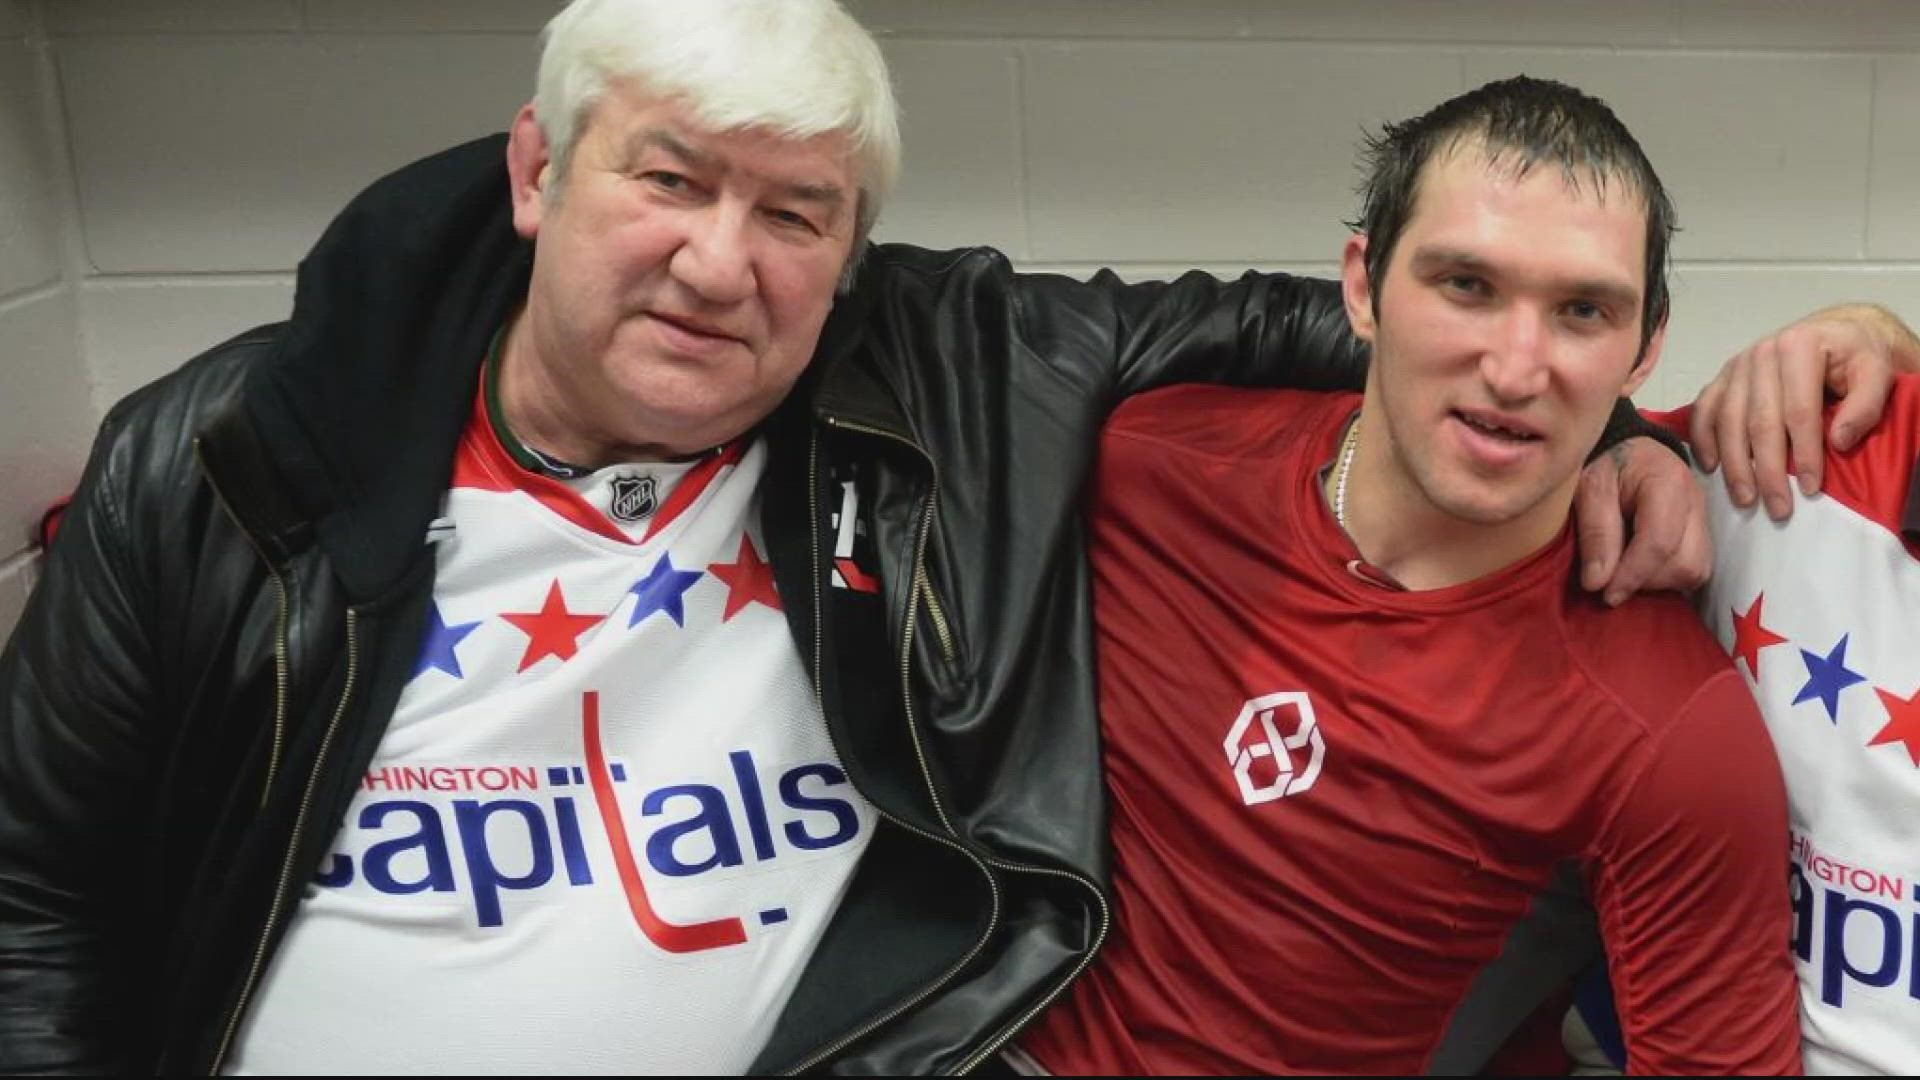 OVECHKIN LOST HIS FATHER MIKHAIL A WEEK AGO TODAY. HE TRAVELED TO RUSSIA TO ATTEND HIS FUNERAL.